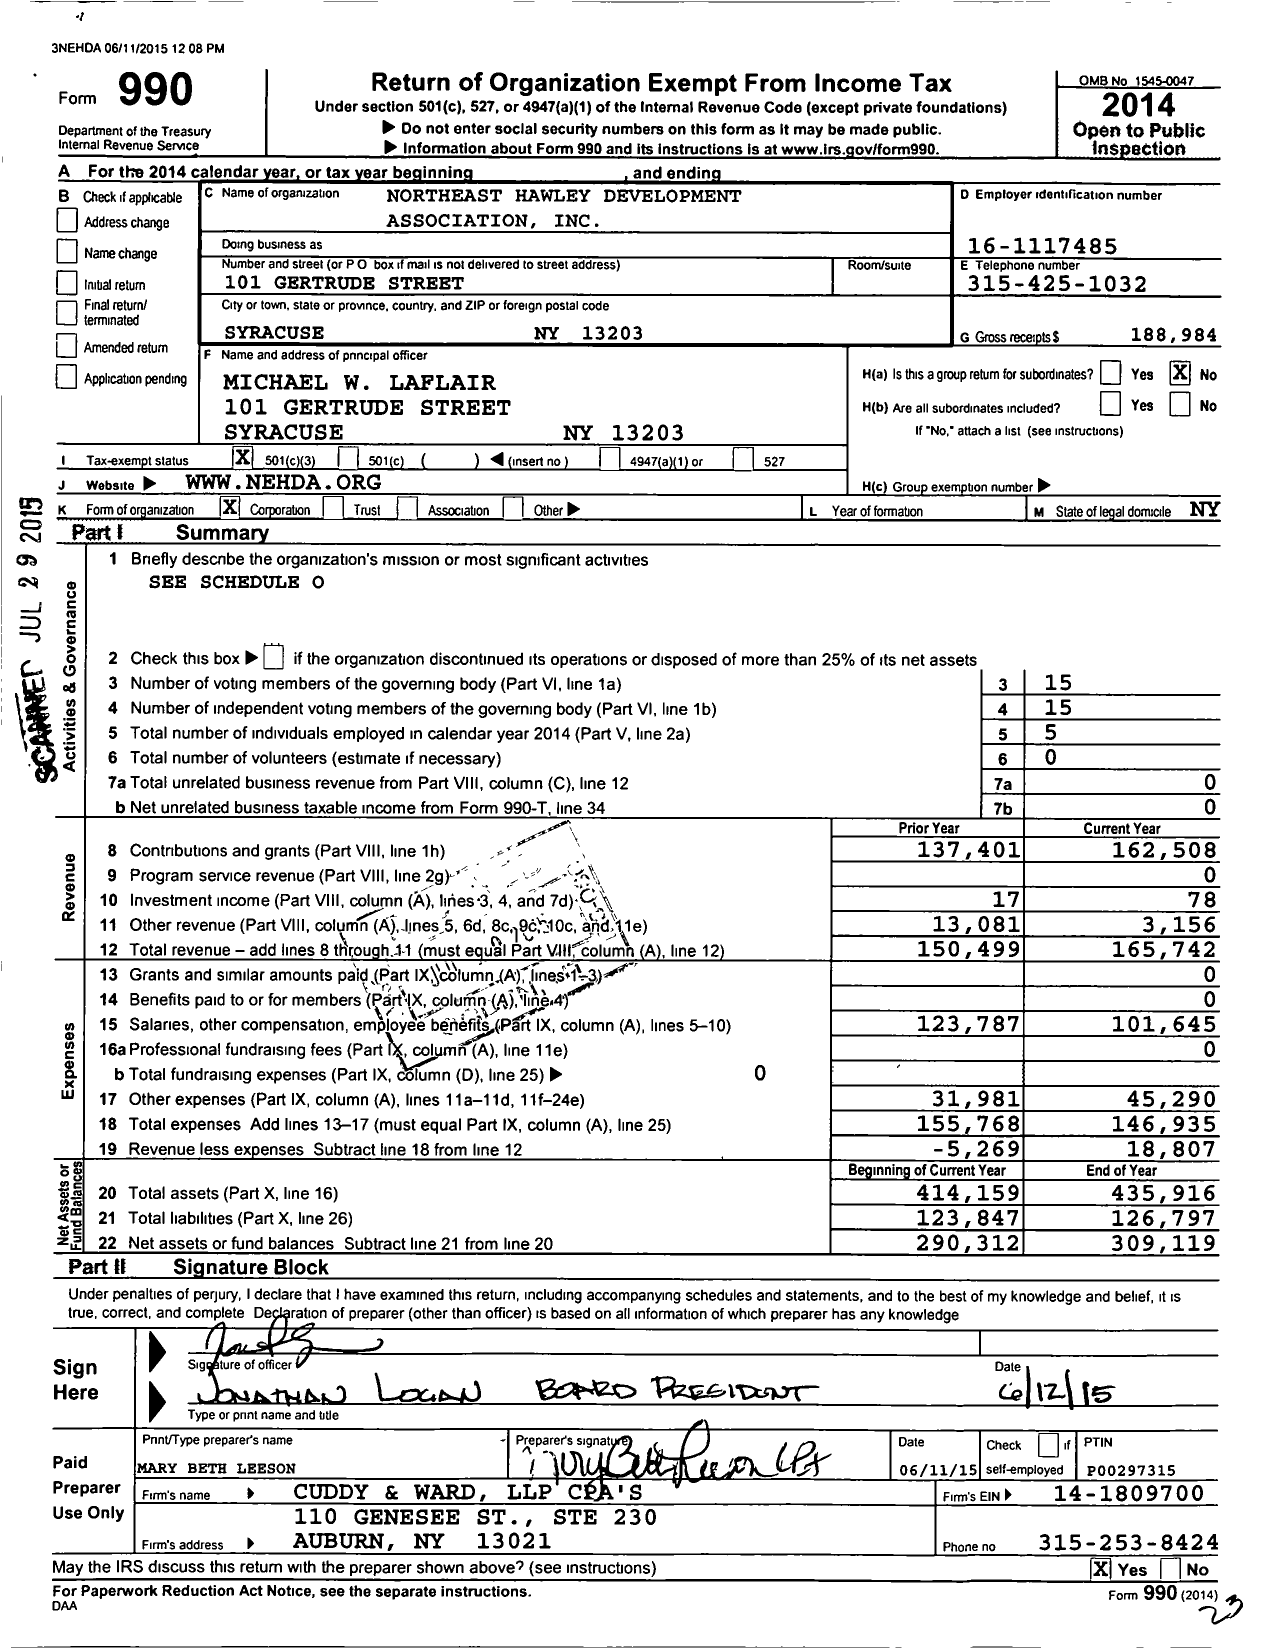 Image of first page of 2014 Form 990 for Northeast Hawley Development Association (NEHDA)